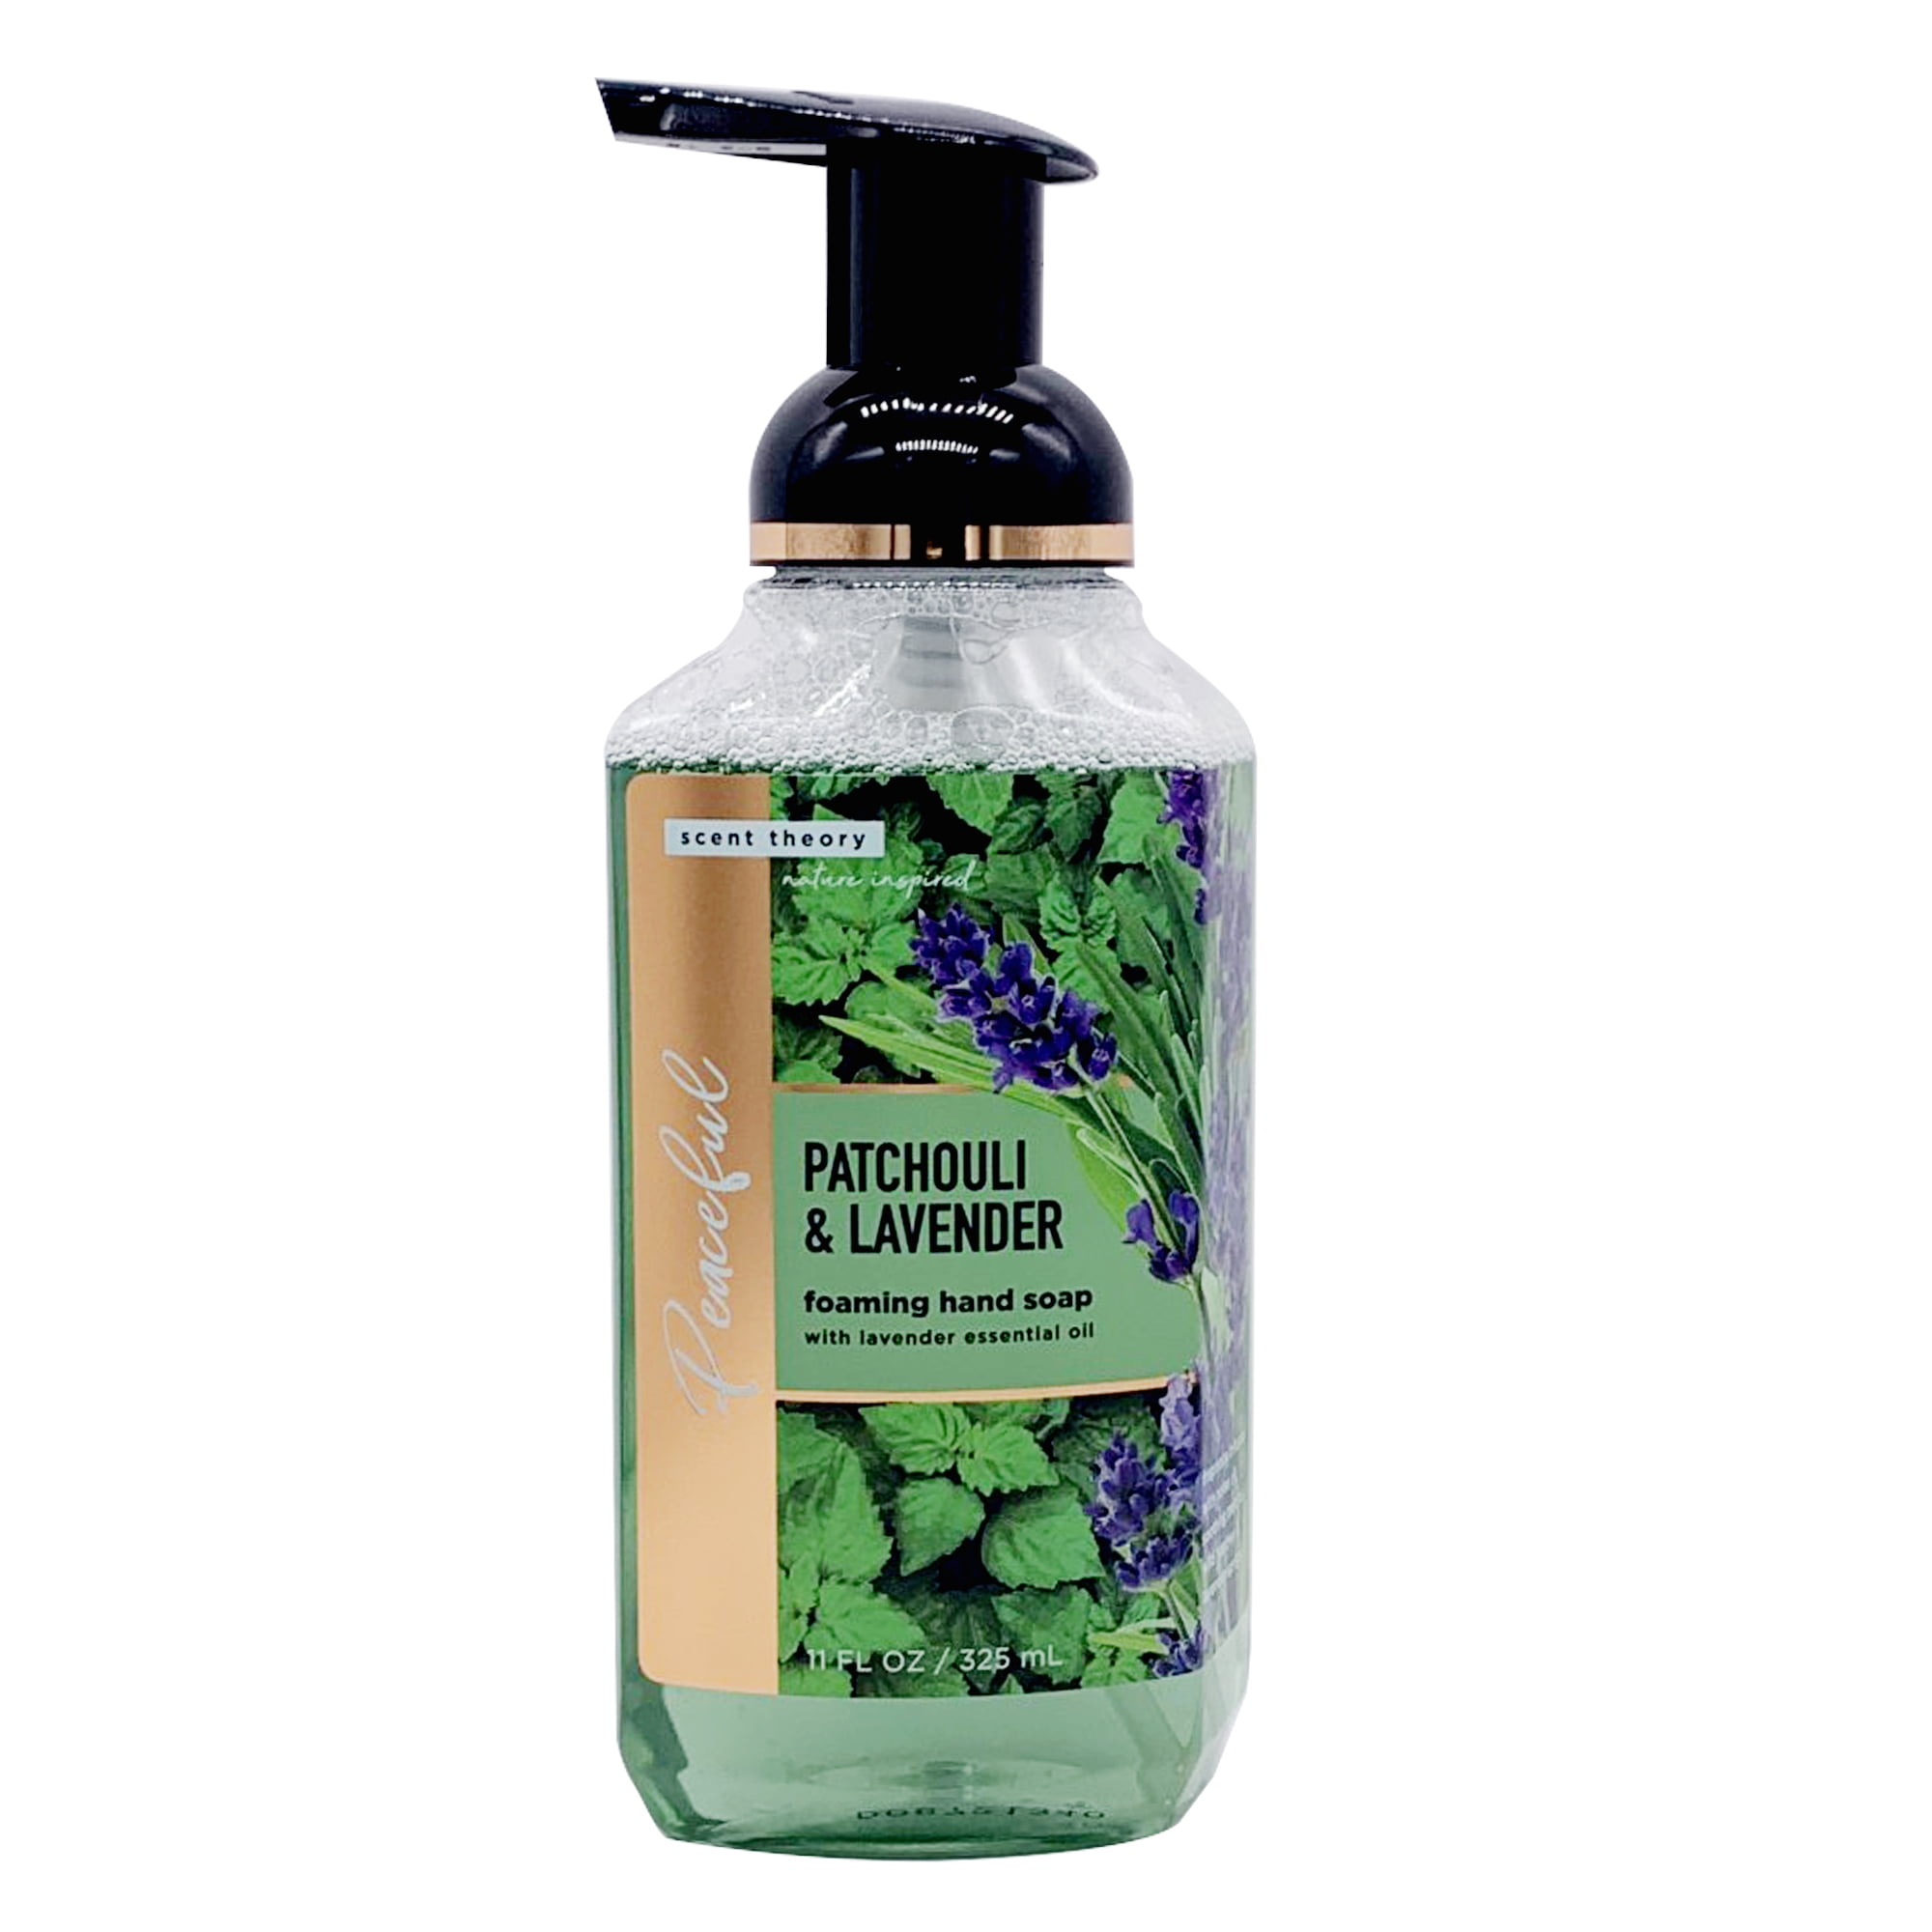 Scent Theory Nature-Inspired Foaming Hand Soap, Patchouli and Lavender, 11 fl oz